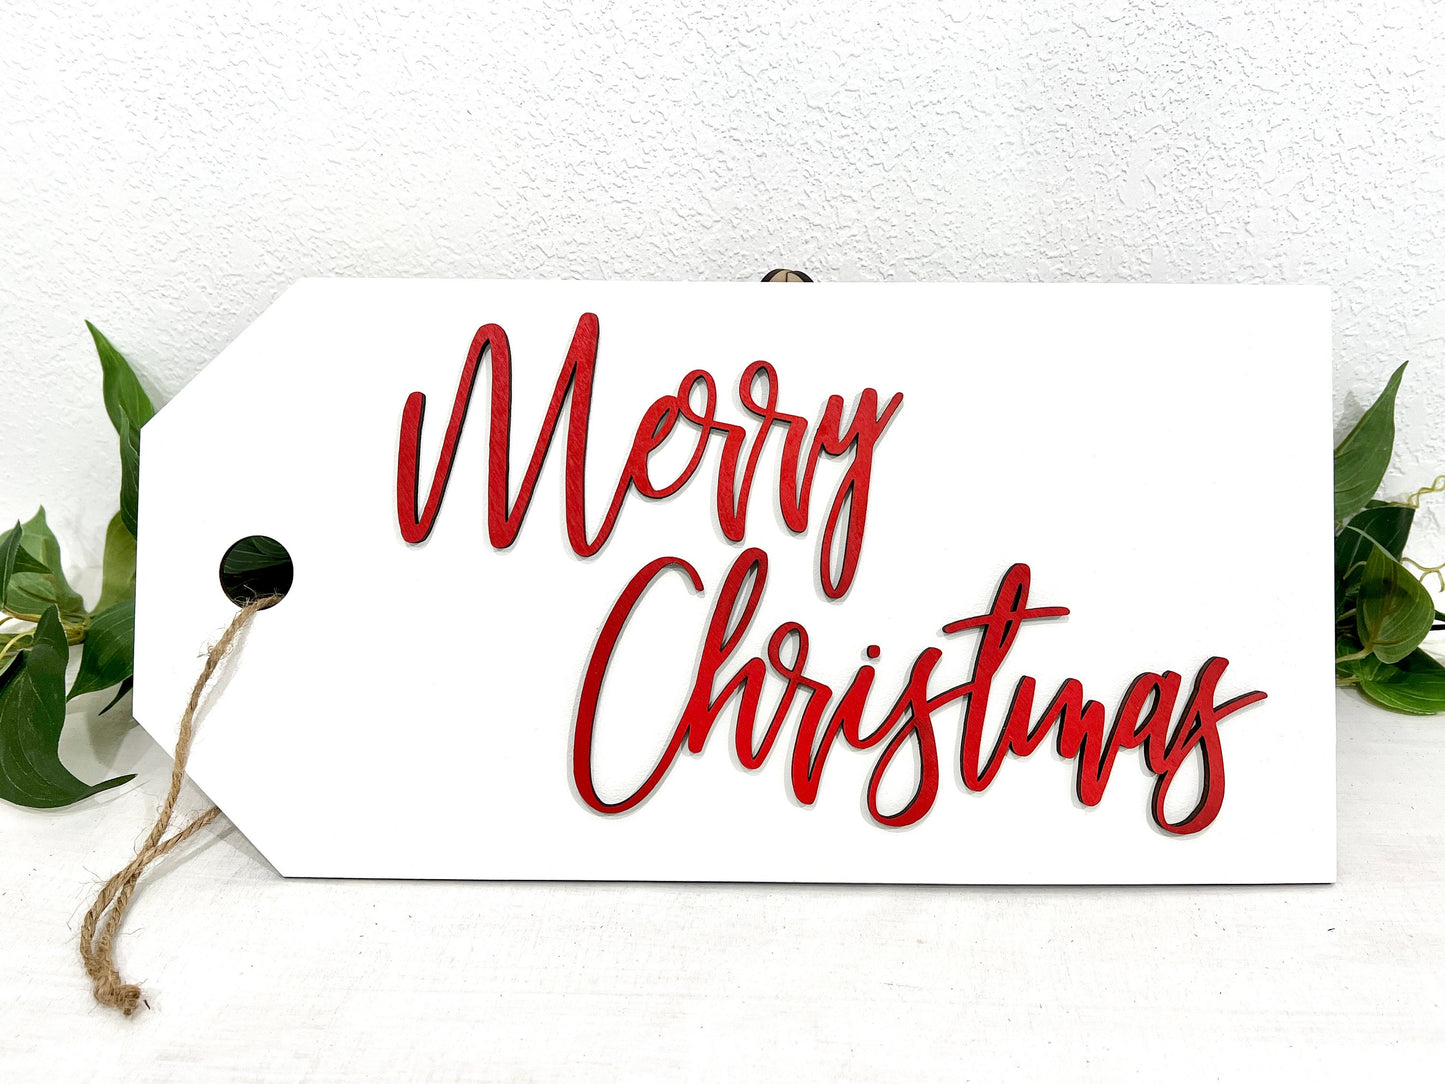 Merry Christmas sign, farmhouse holiday decor, gift tag signs, country decorations, 3D rustic Christmas wall hanging, winter door hanger